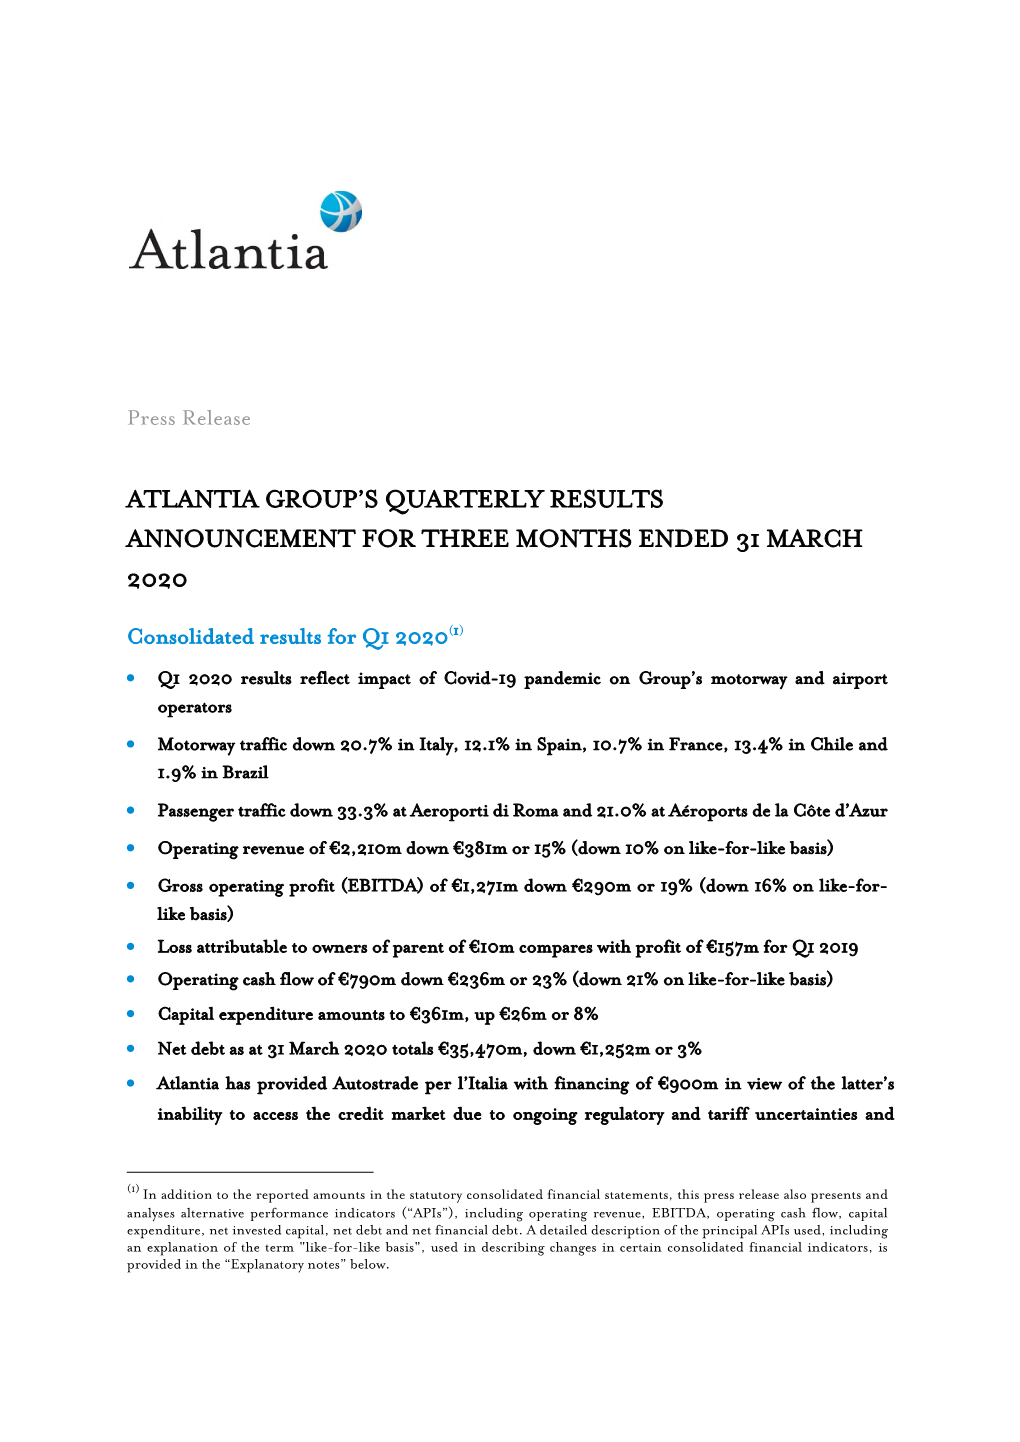 Atlantia Group's Quarterly Results Announcement For